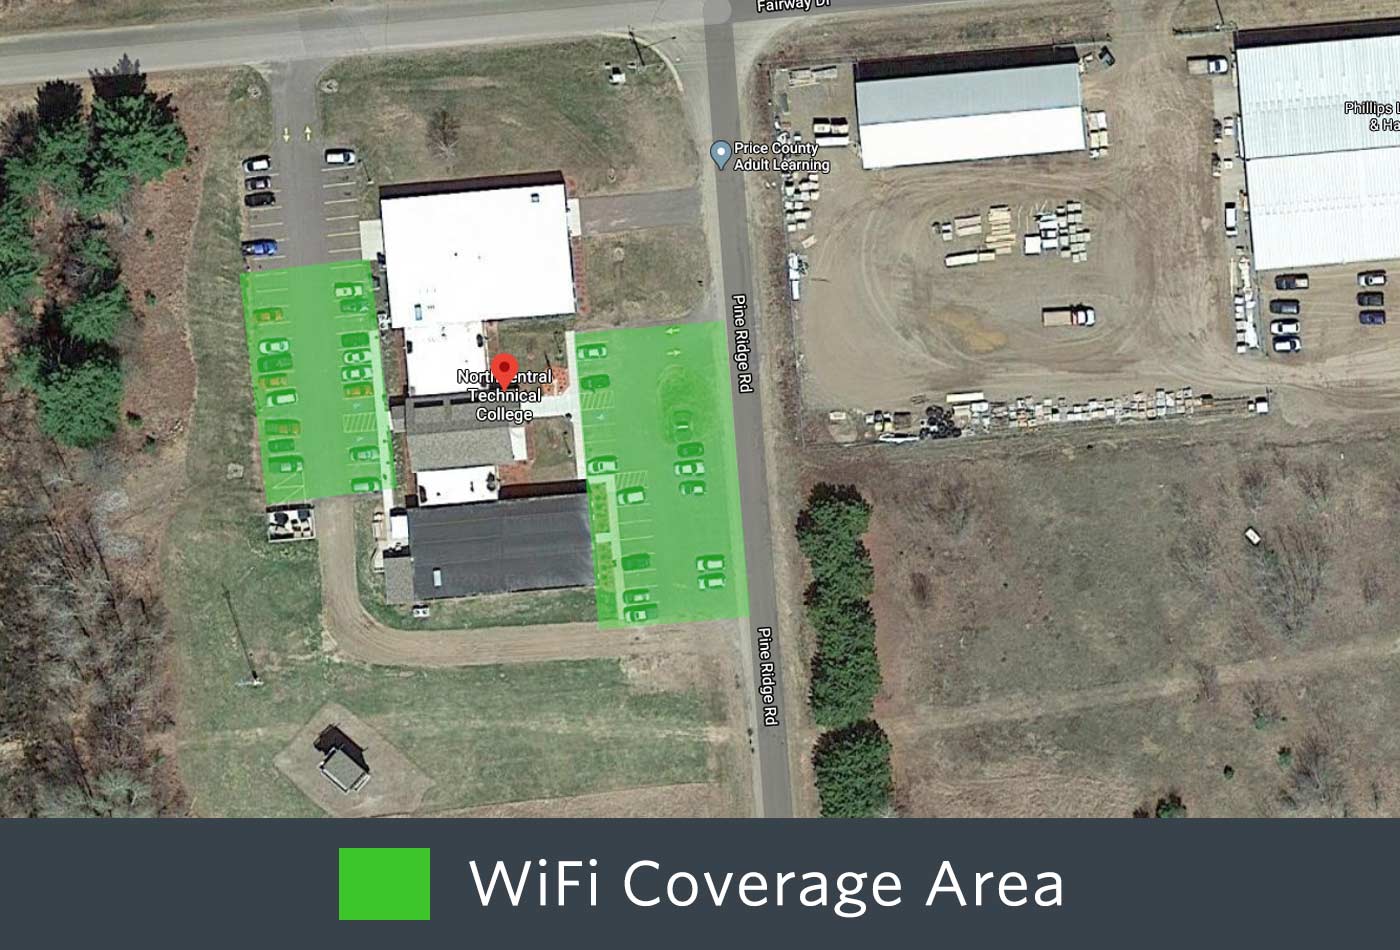 Outdoor WiFi coverage of the front of the Phillips Campus